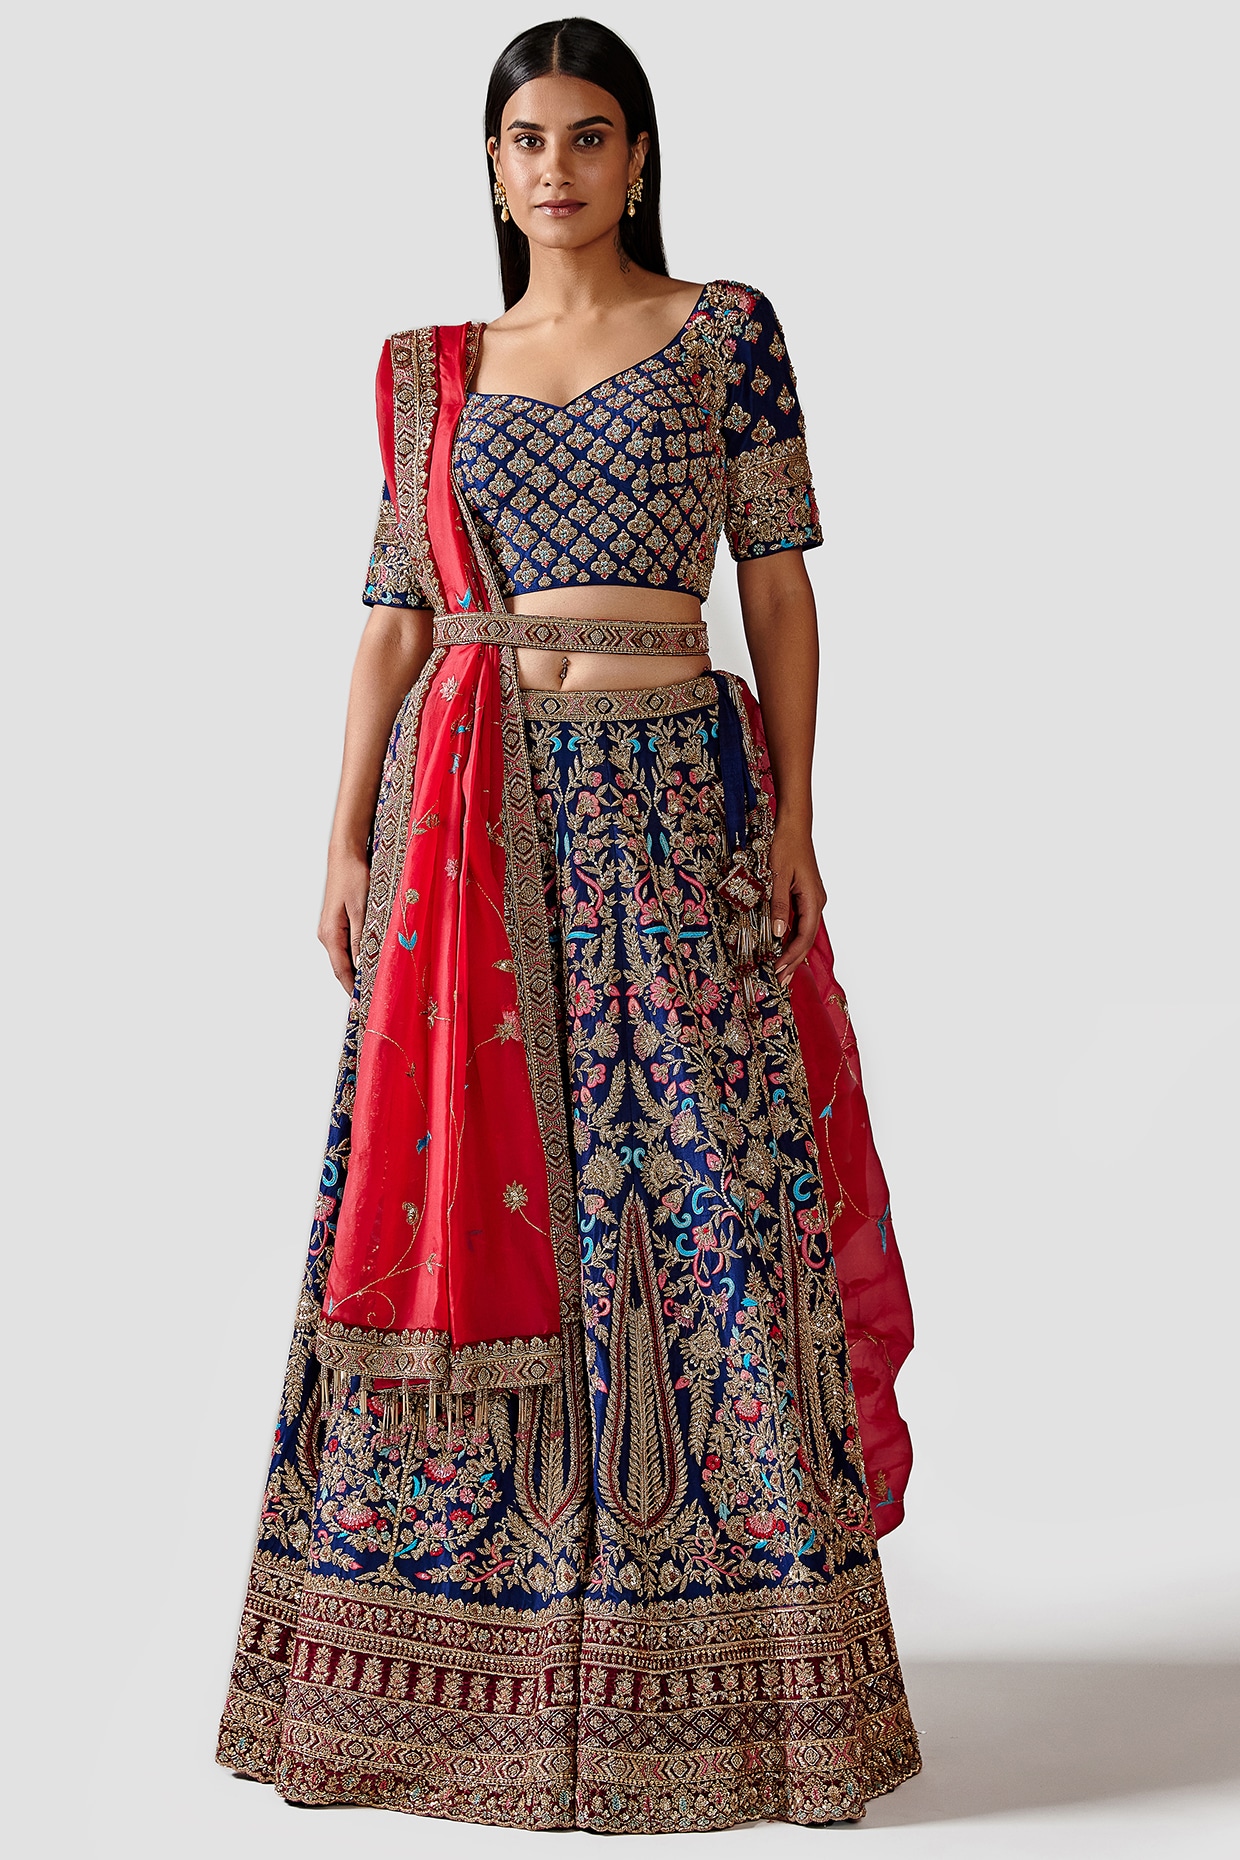 Blue lehenga red blouse bridals wear suit with handwork designs